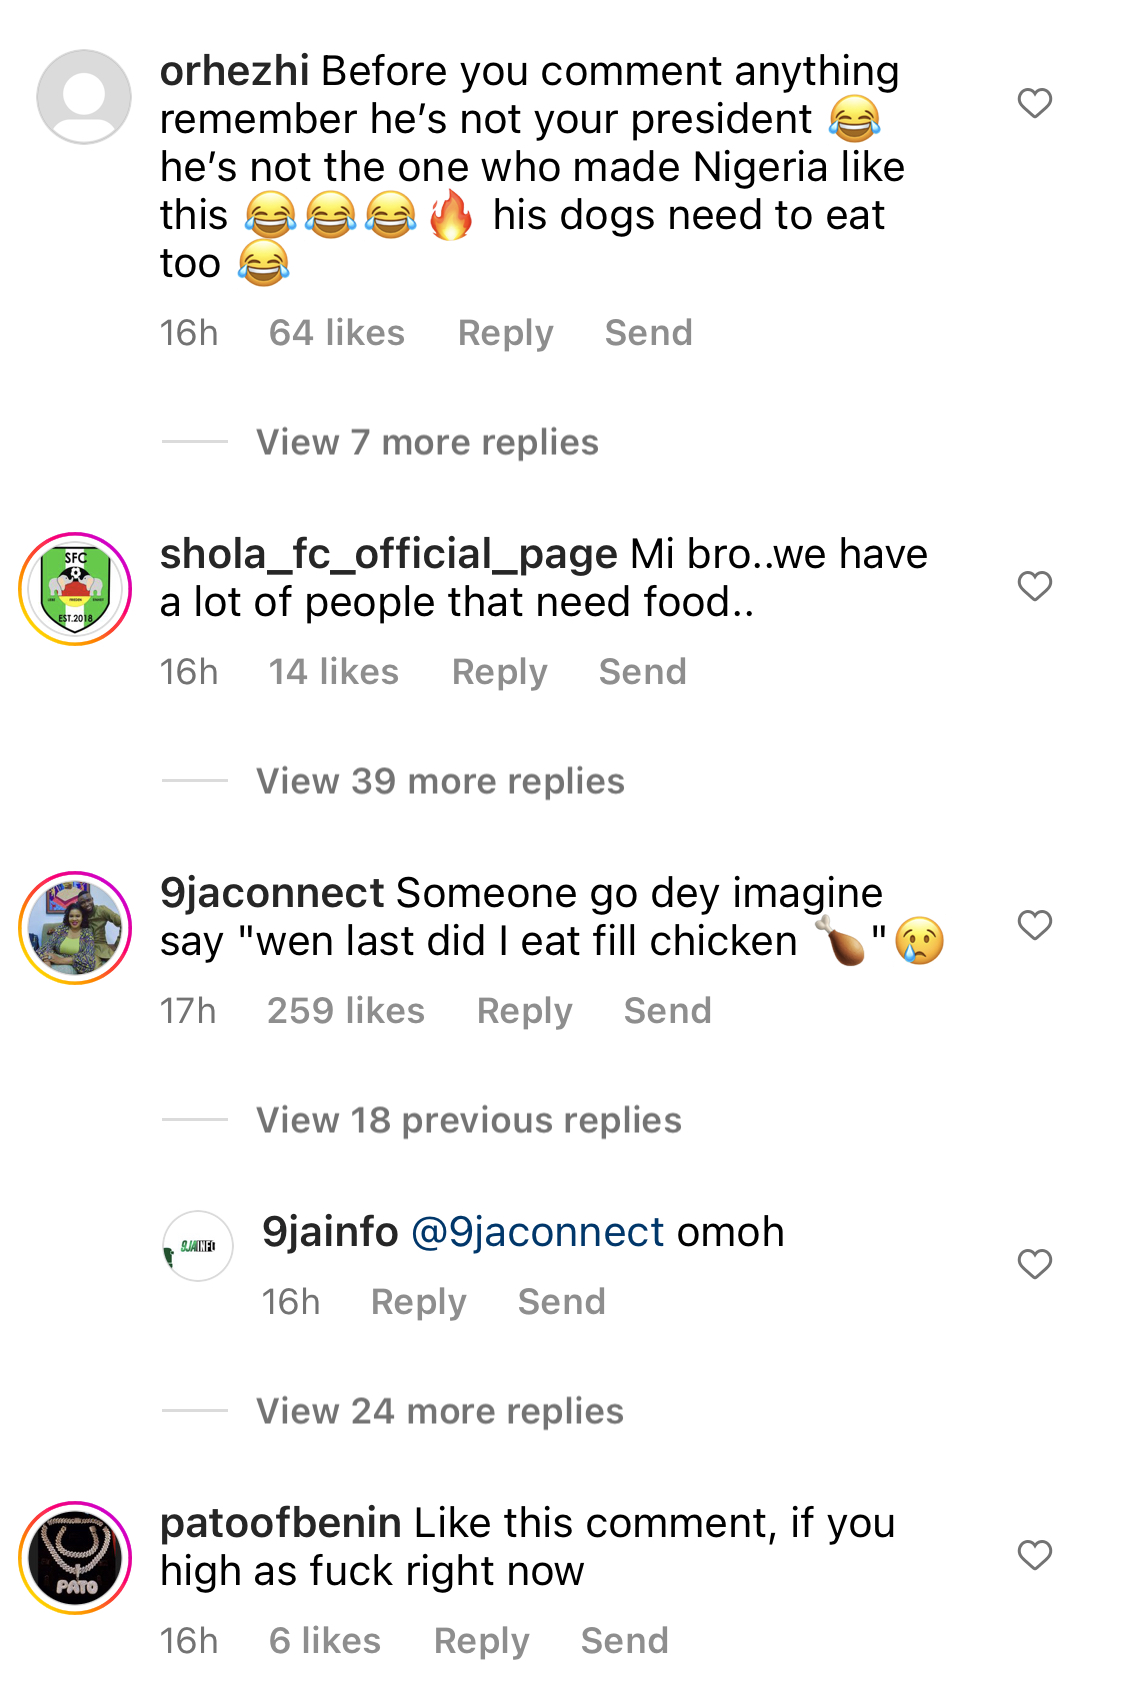 I wish I was a Dog - Fans react as Naira Marley feeds his 7 dogs with full chickens each [video]